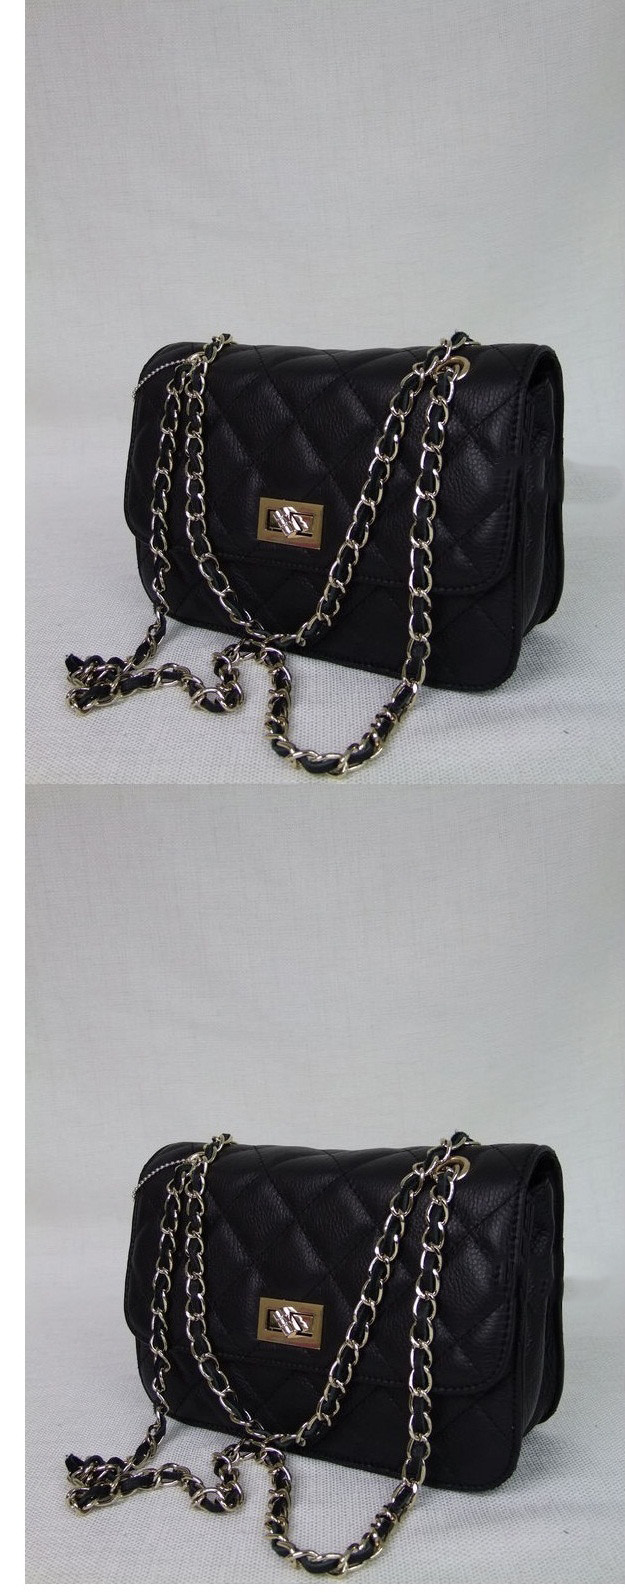 Motte Preorder: Chanel Inspired Flap Bag in Genuine Calf Leather